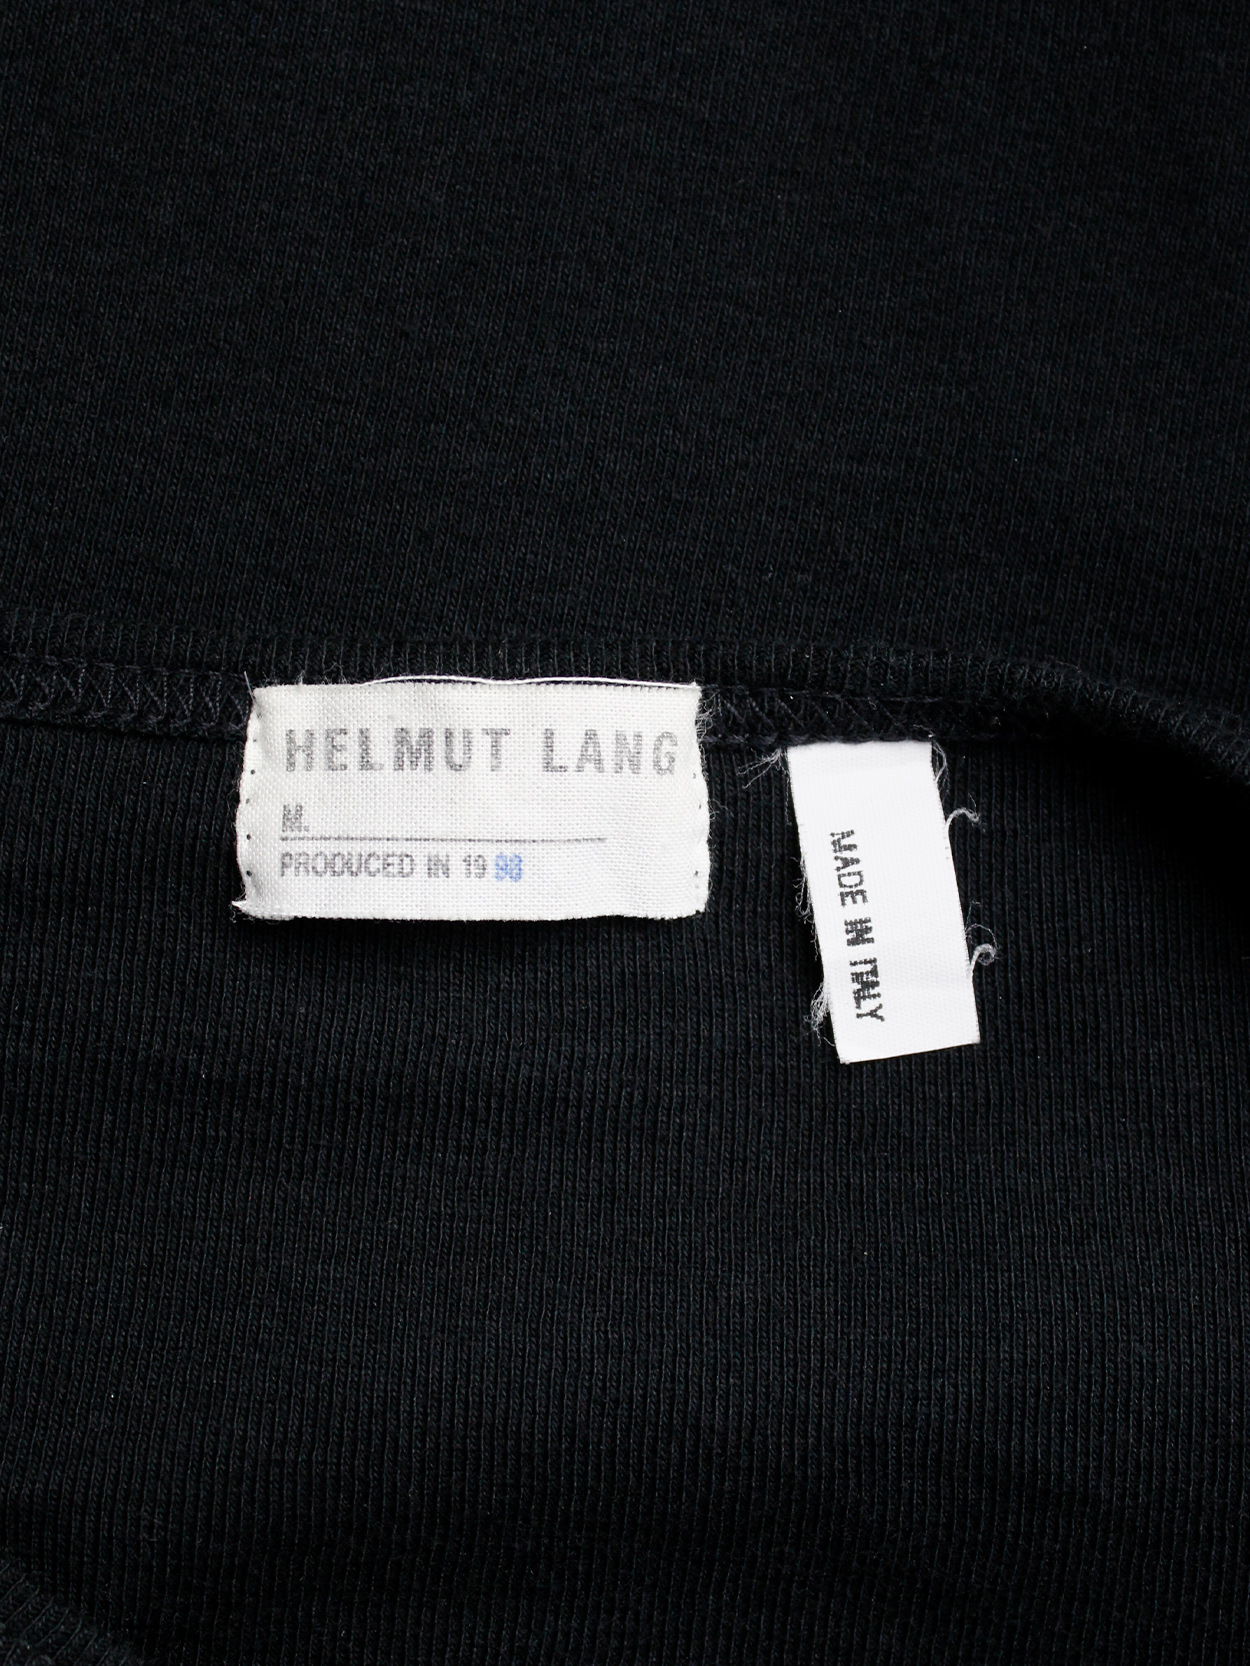 Helmut Lang black t-shirt with open slits at the sleeves — 1998 - V A N ...